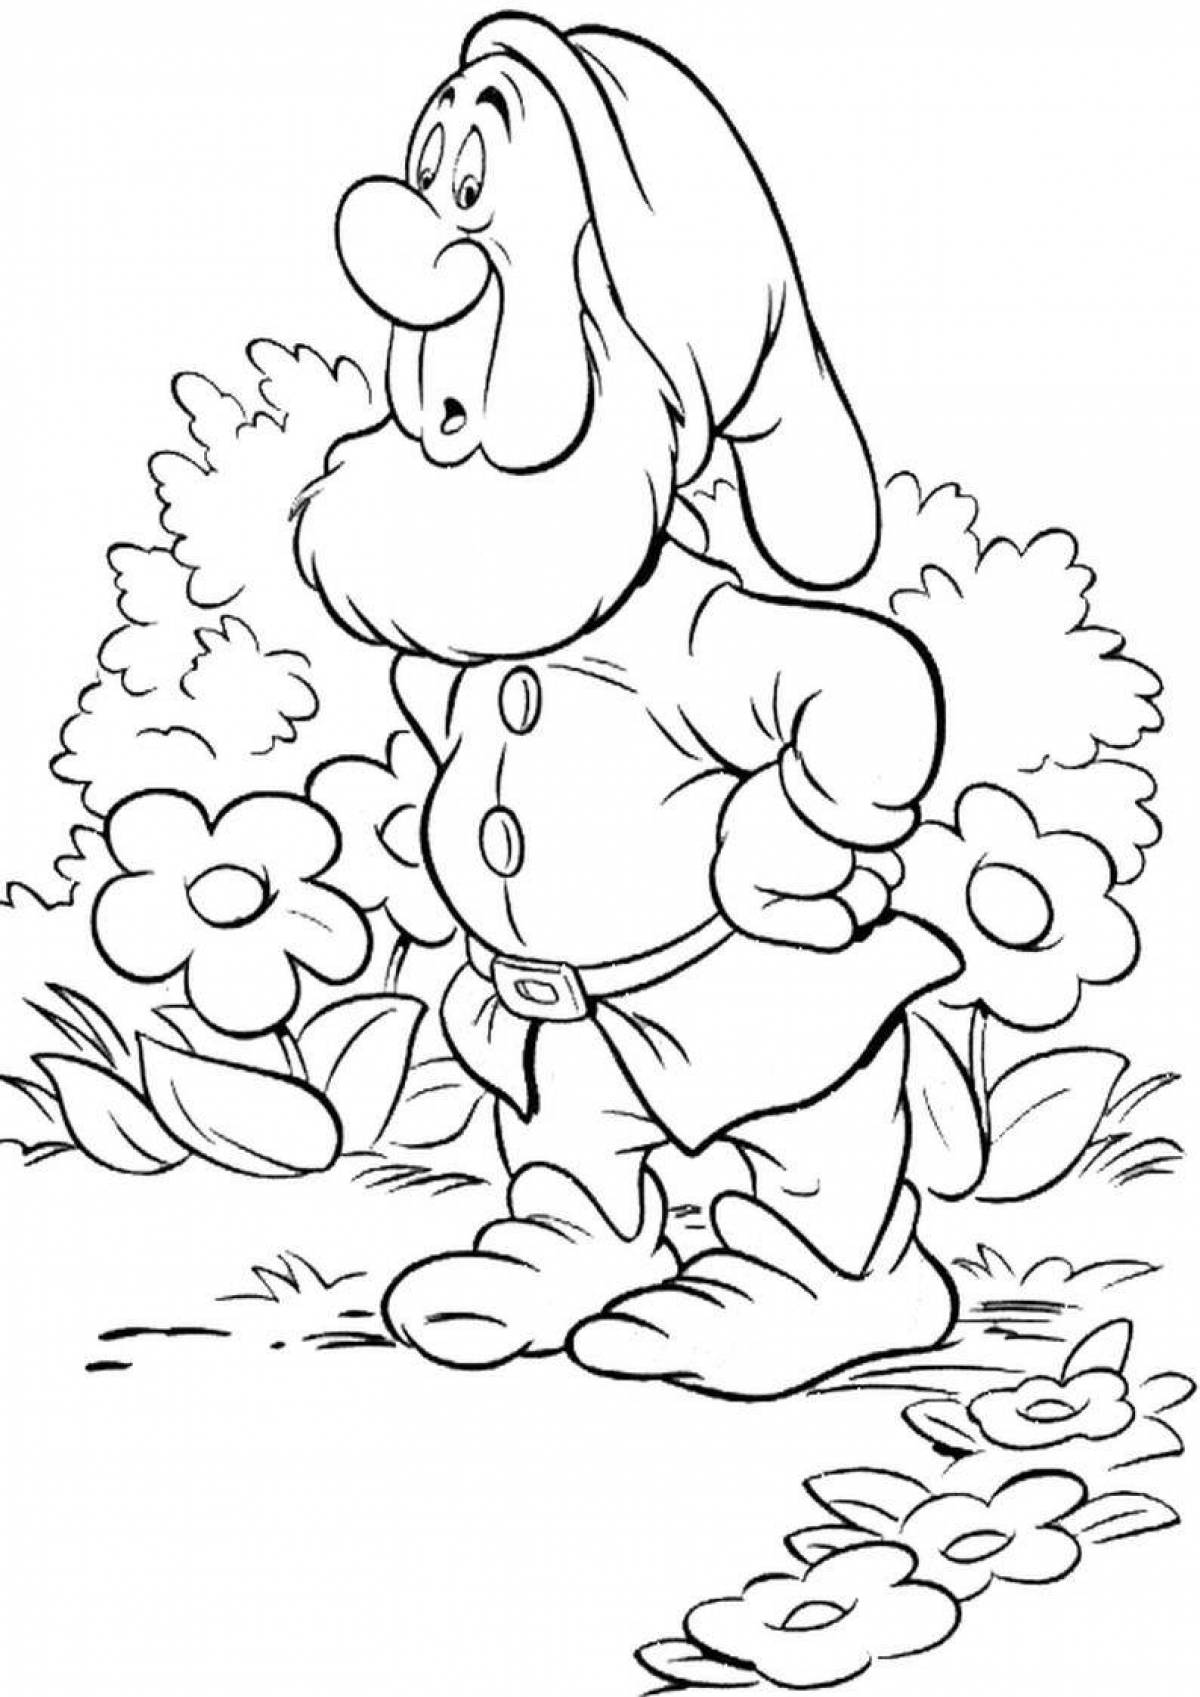 Adorable gnome coloring pages